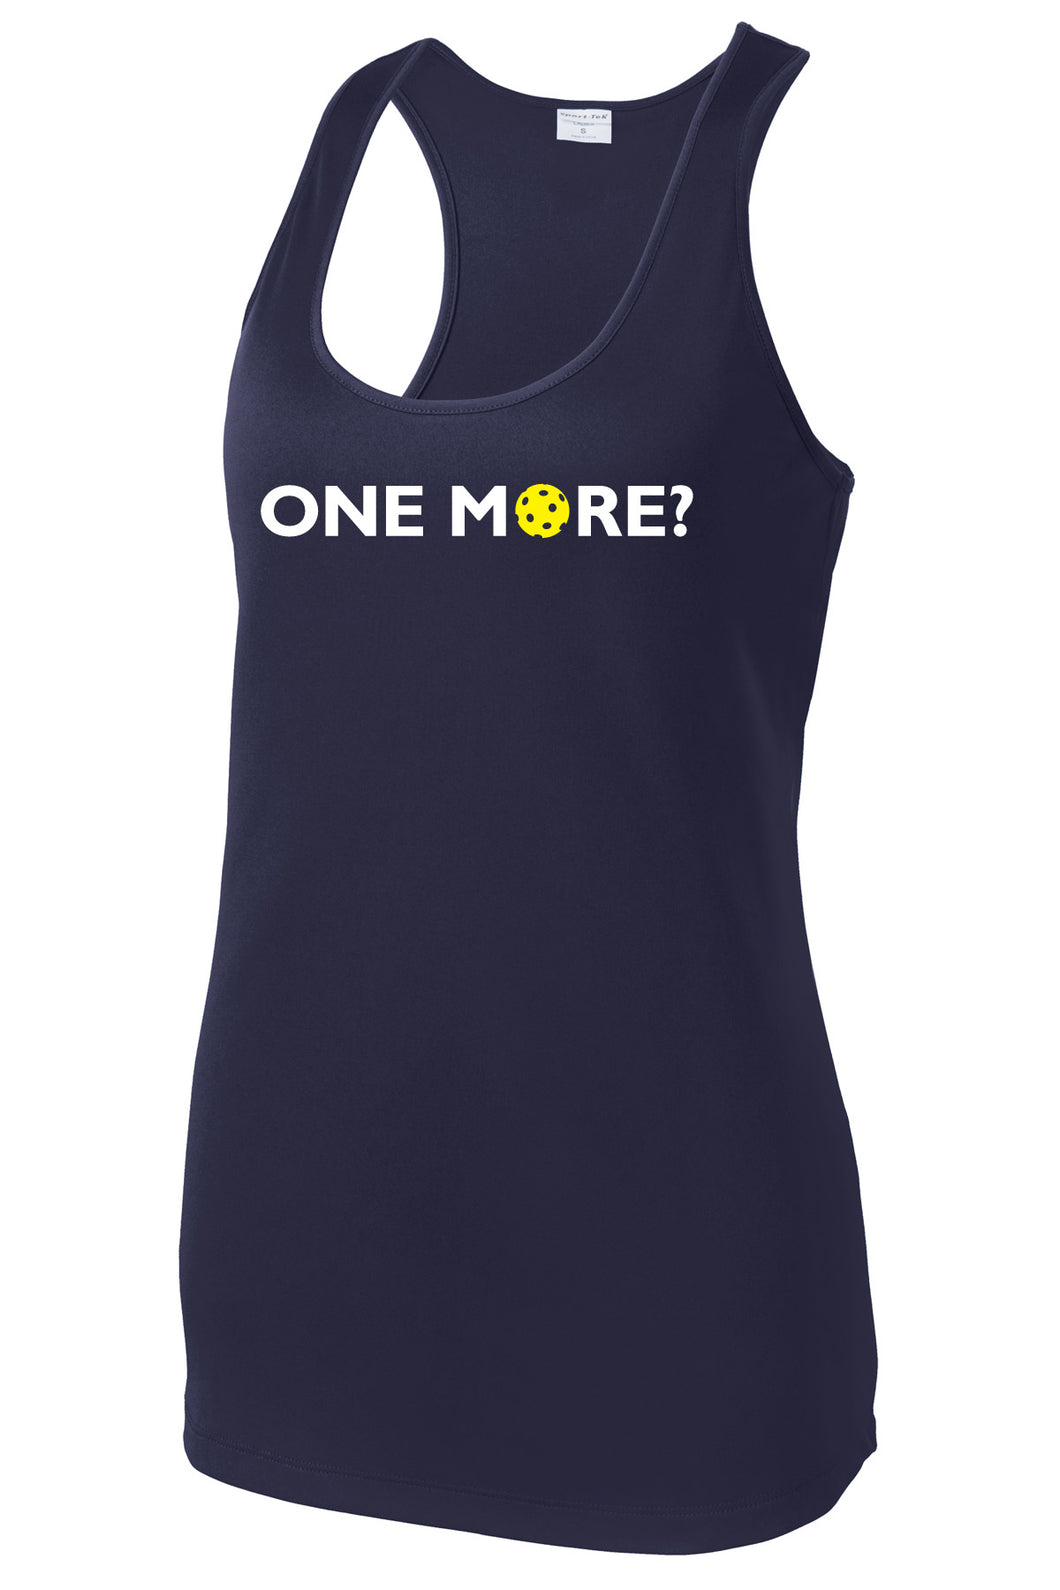 One More? - Womens Performance Racerback Tank